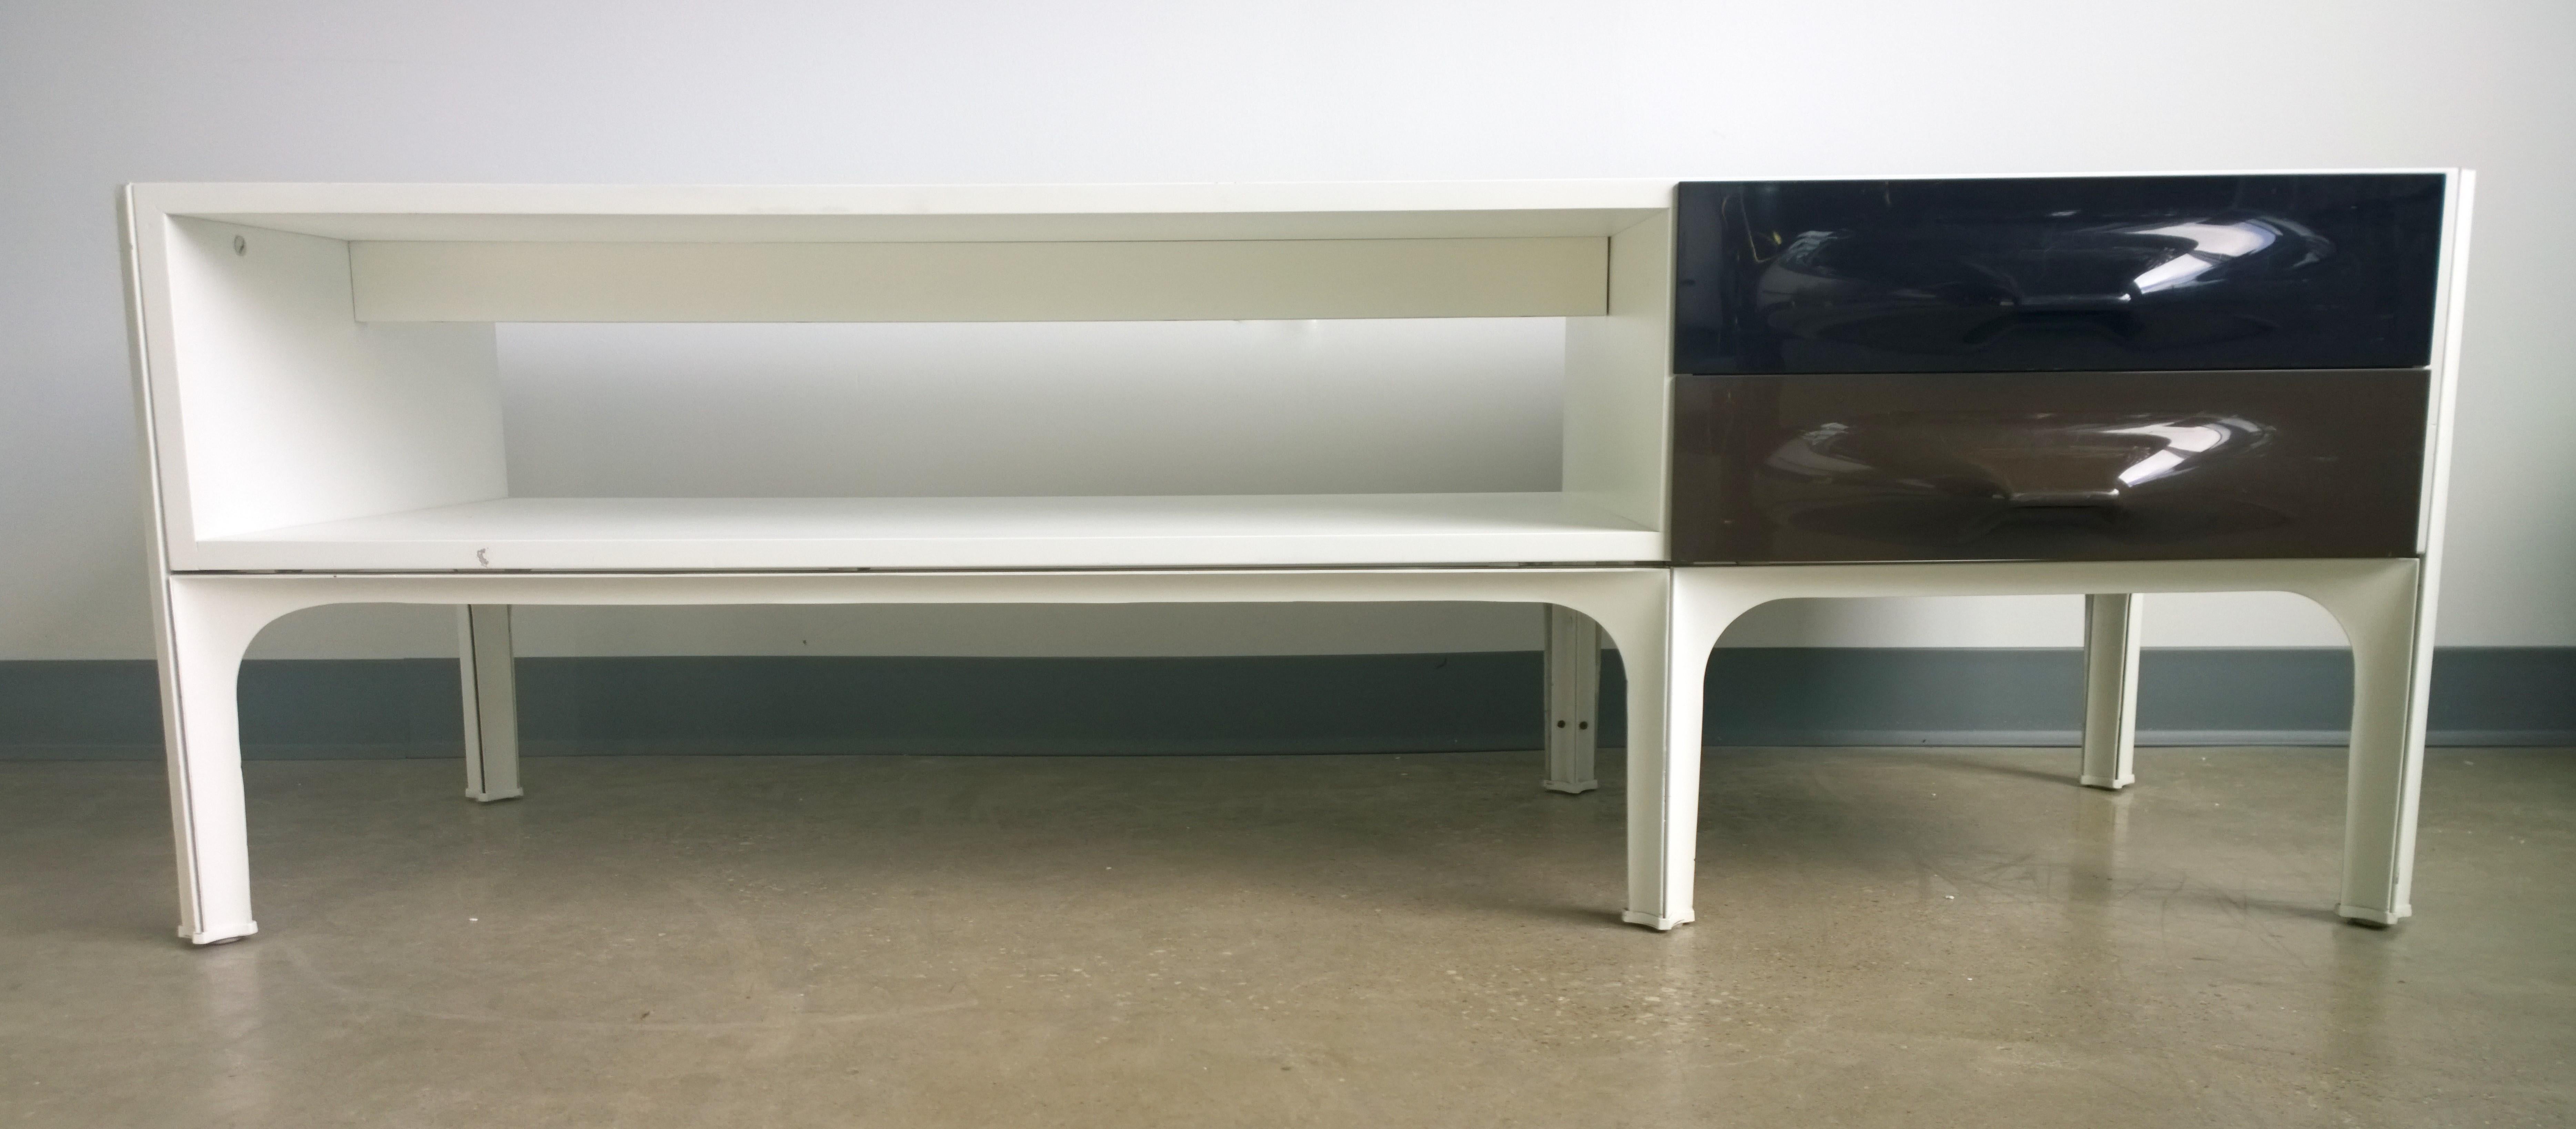 Offered is a Mid-Century Modern iconic Raymond Loewy white laminate low table / console / credenza / coffee table with two shelves and two signature black and chocolate brown molded plastic drawers that open from either side of the table. This table